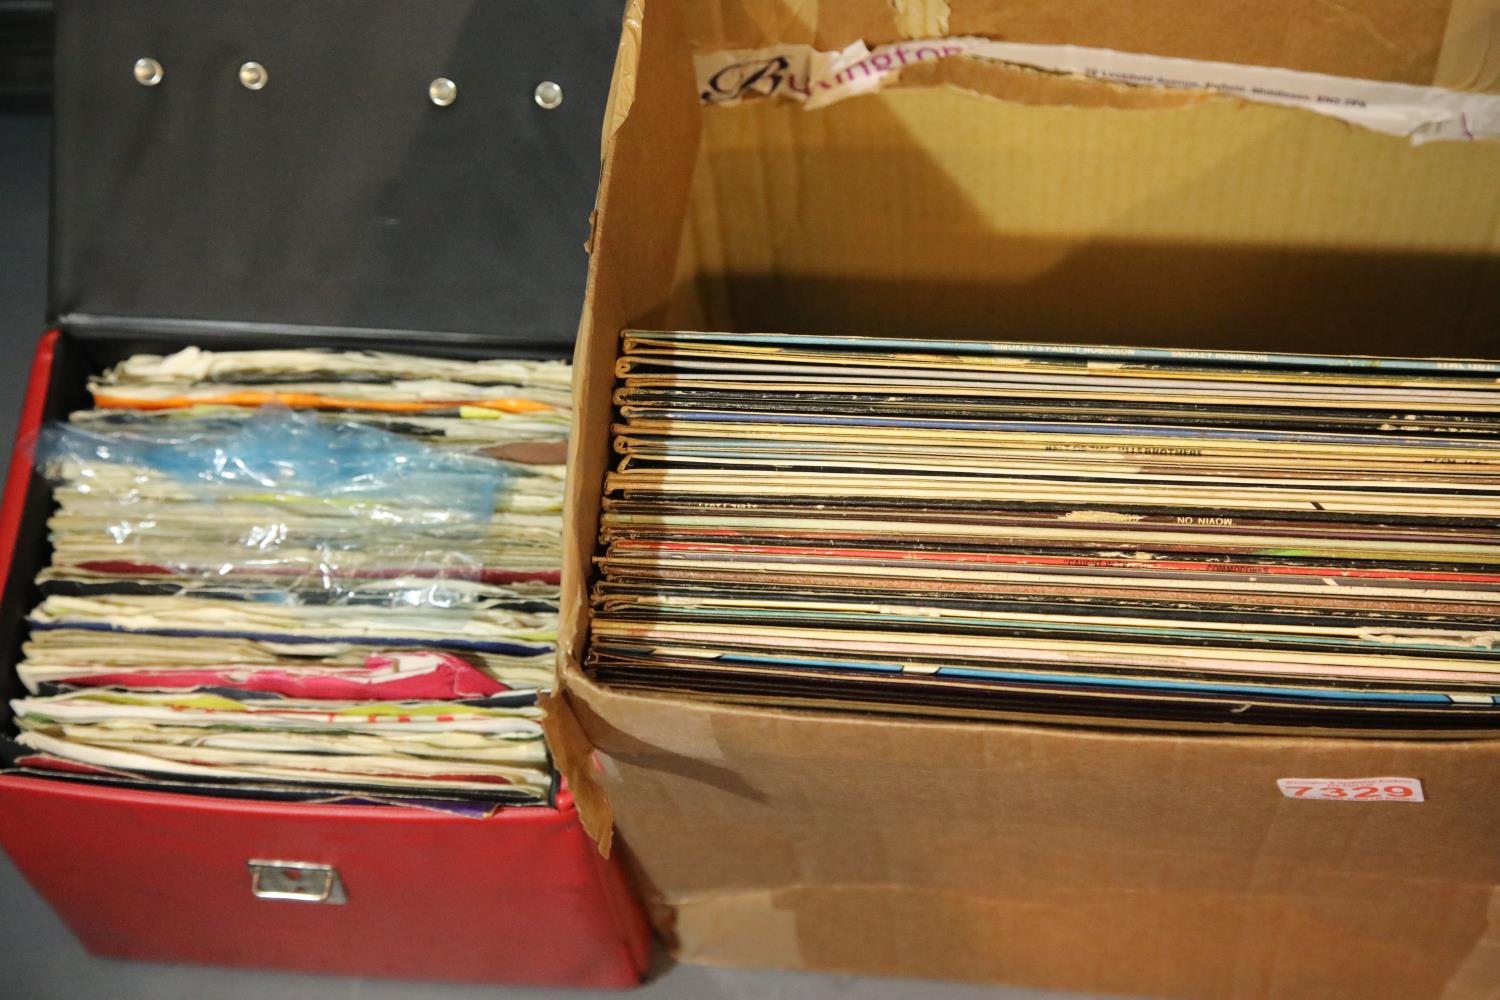 Quantity of mixed genre LPs and singles to include Tamla Motown, Soul, 1960s, 1970s. Not available